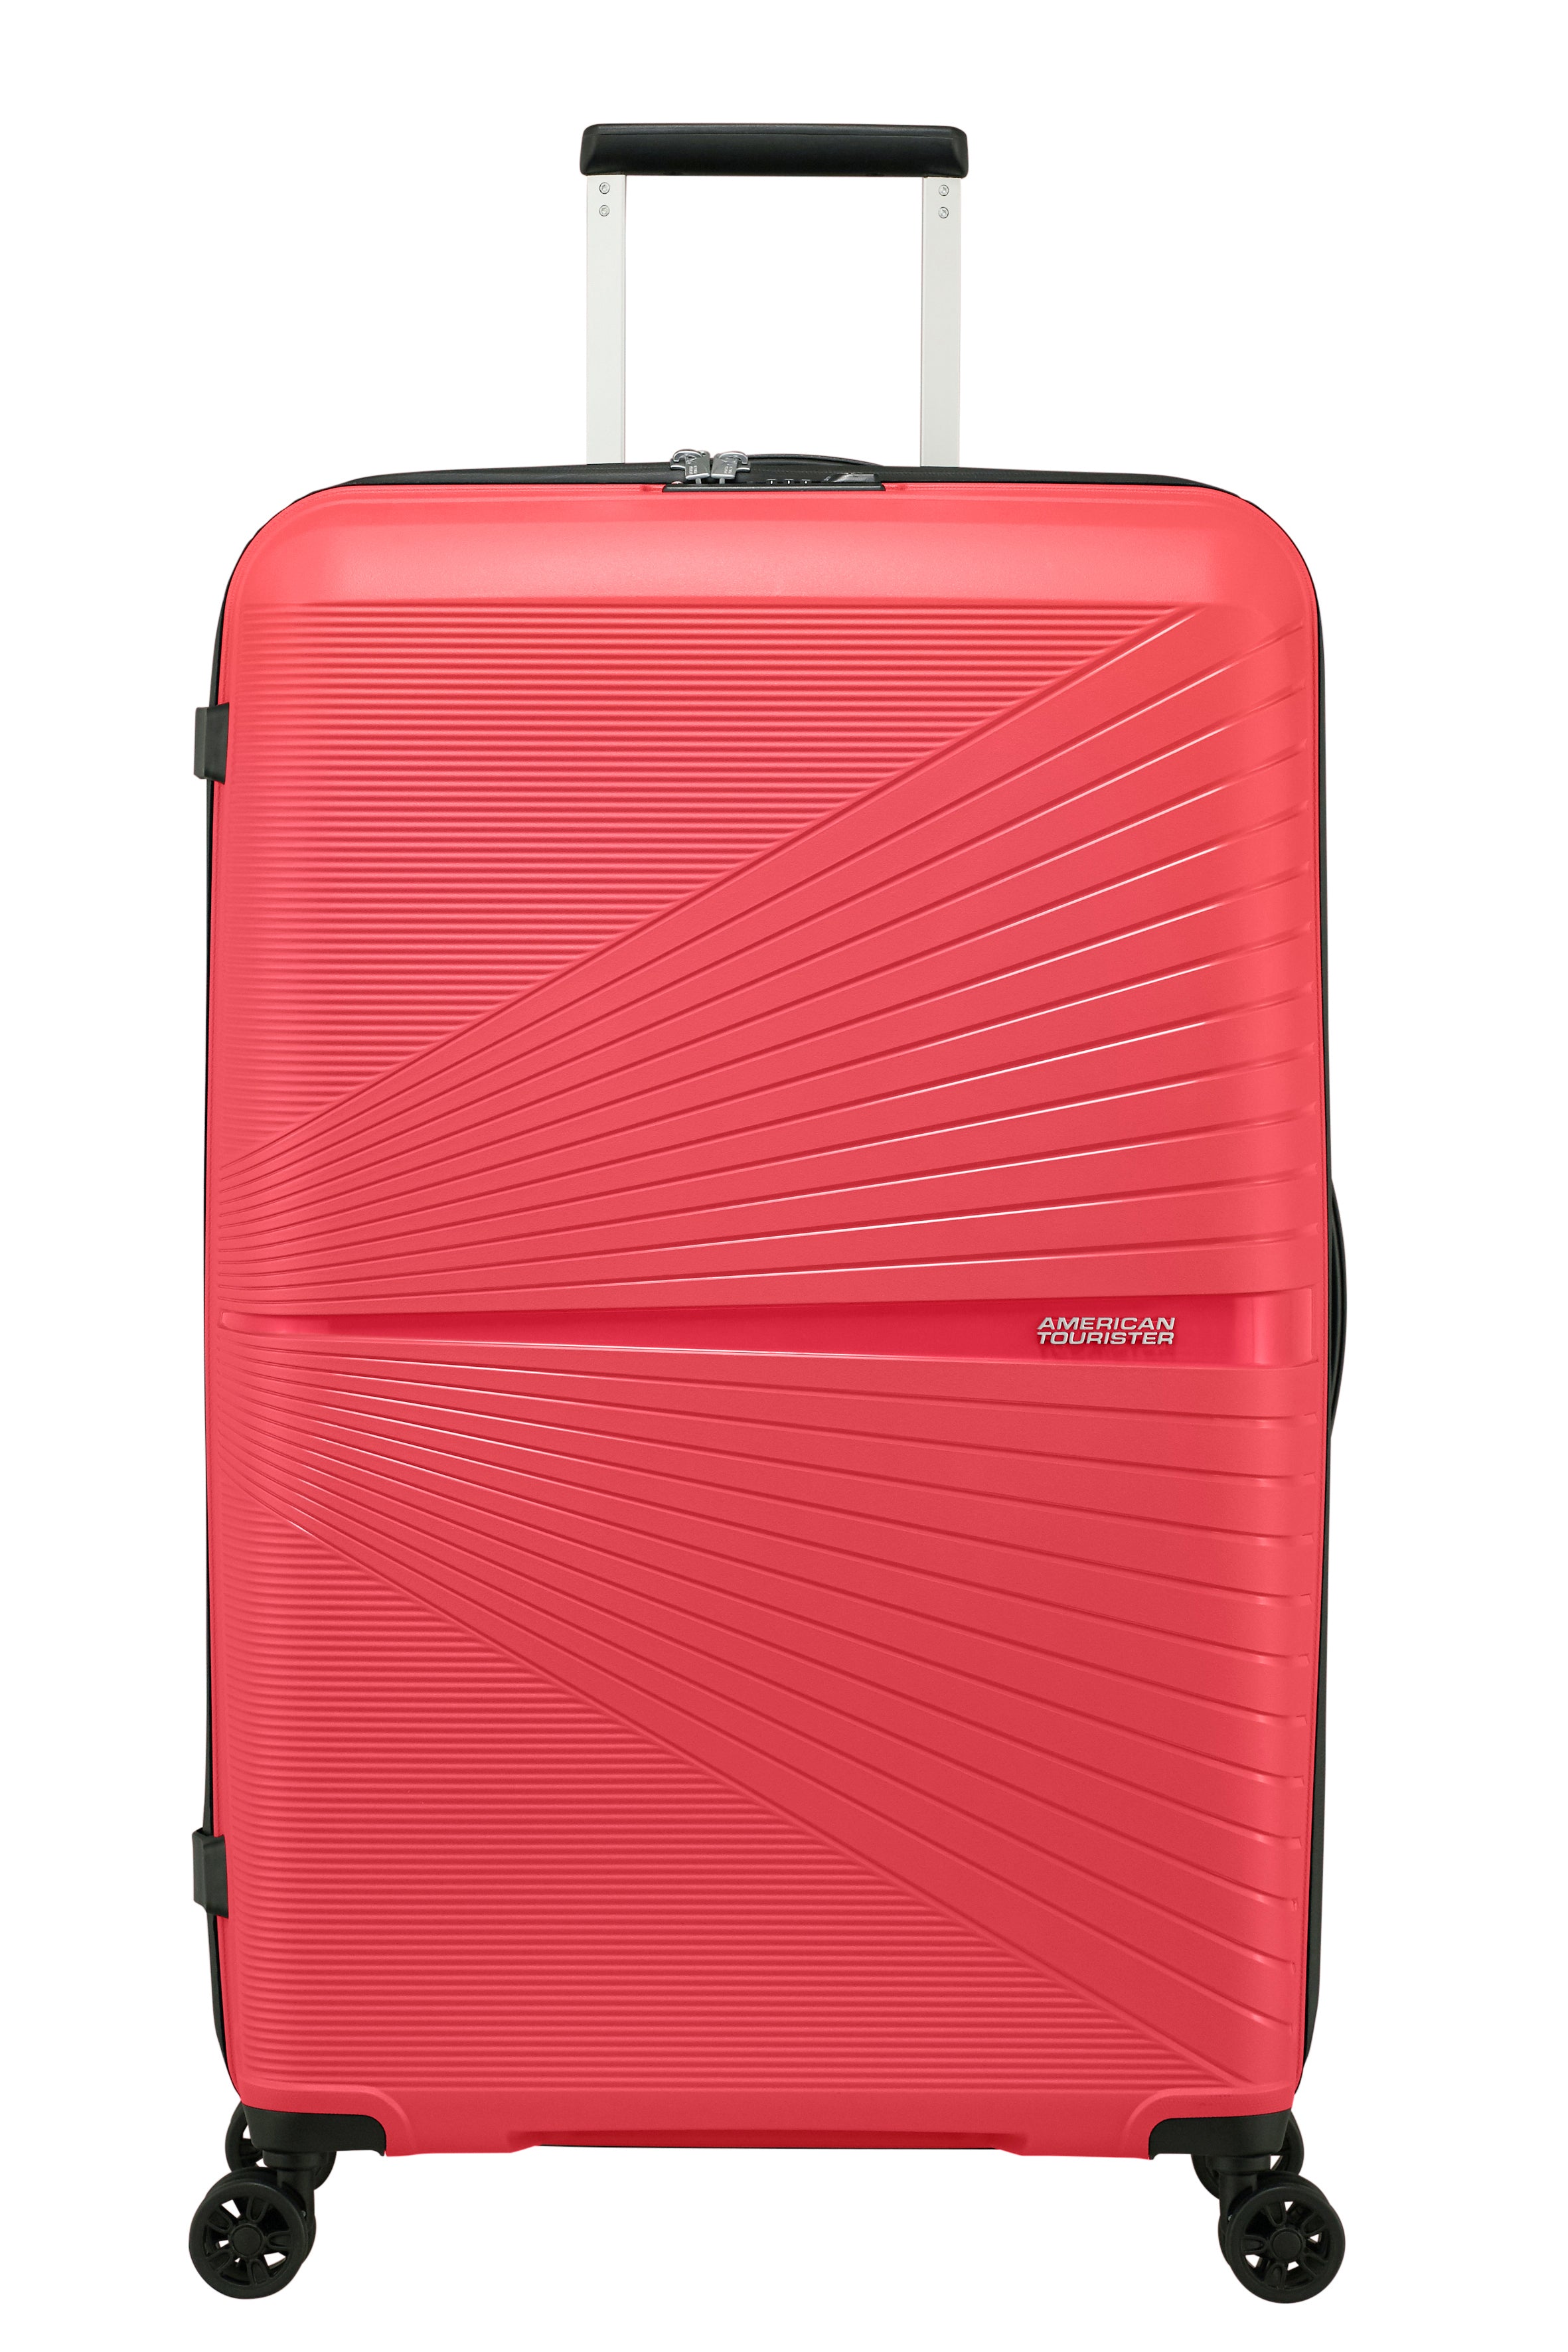 American Tourister - Airconic 77cm Large 4 Wheel Hard Suitcase - Paradise Pink-7